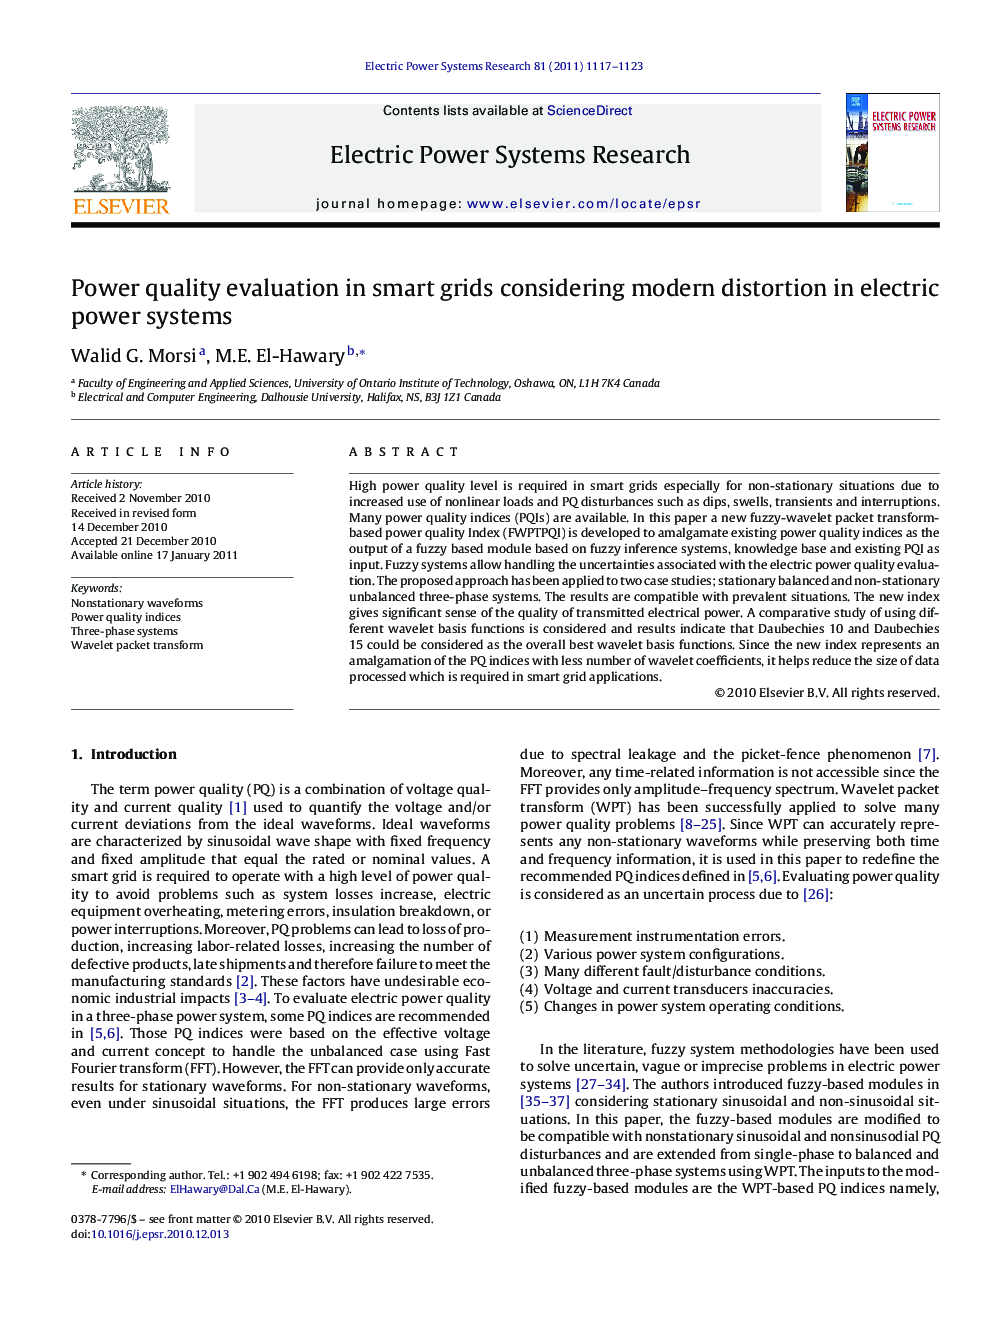 Power quality evaluation in smart grids considering modern distortion in electric power systems